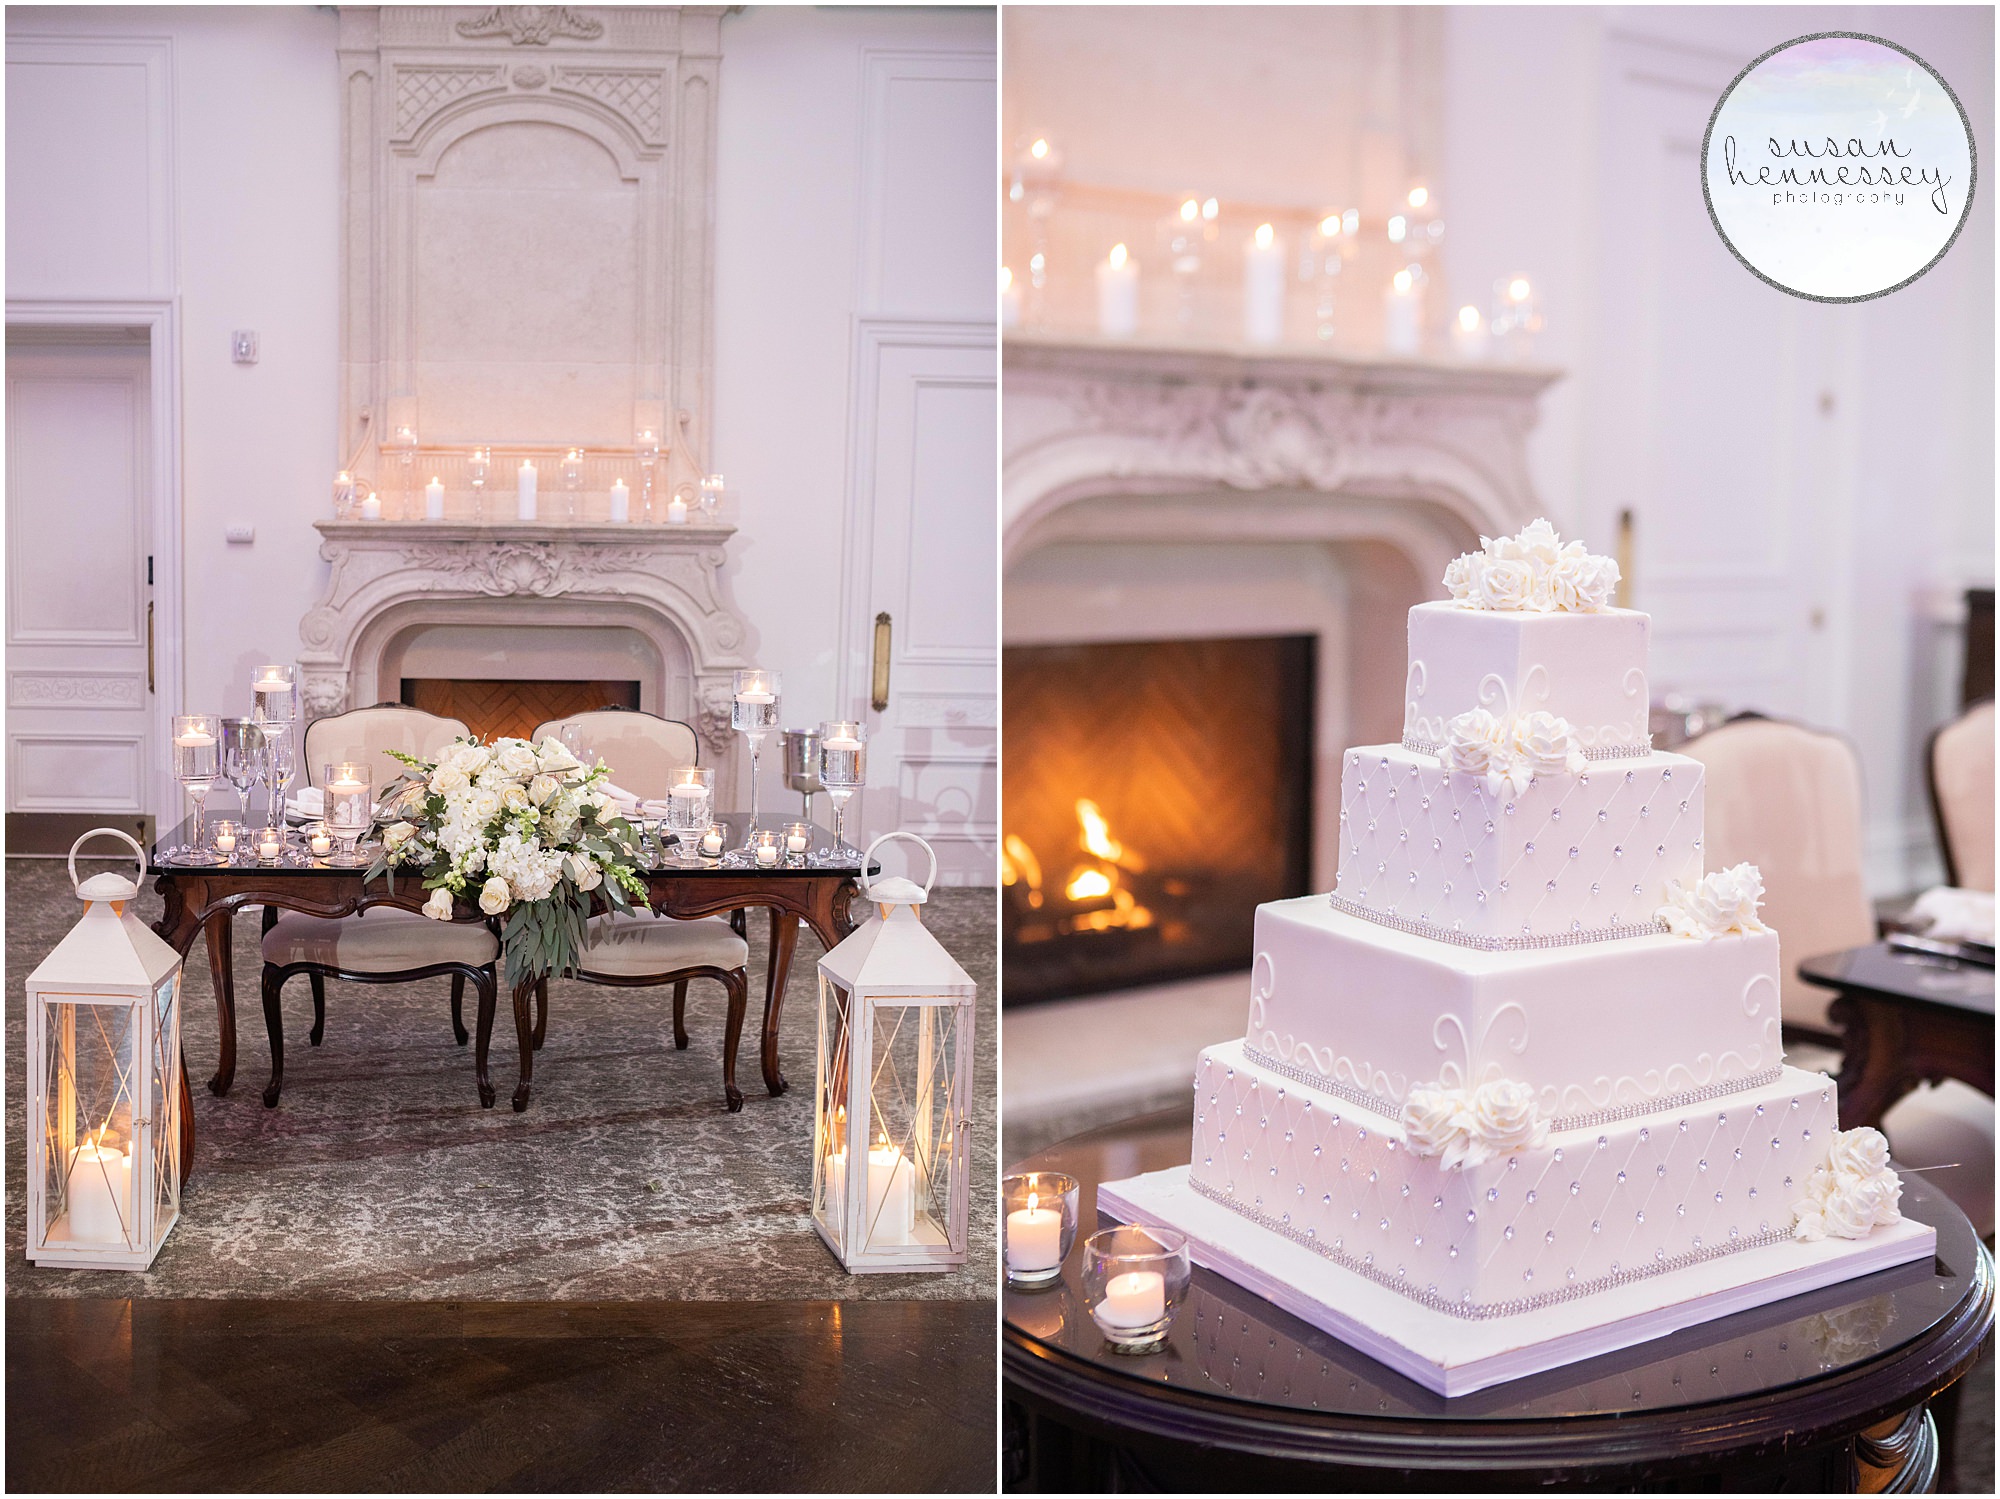 The sweetheart table and wedding cake.